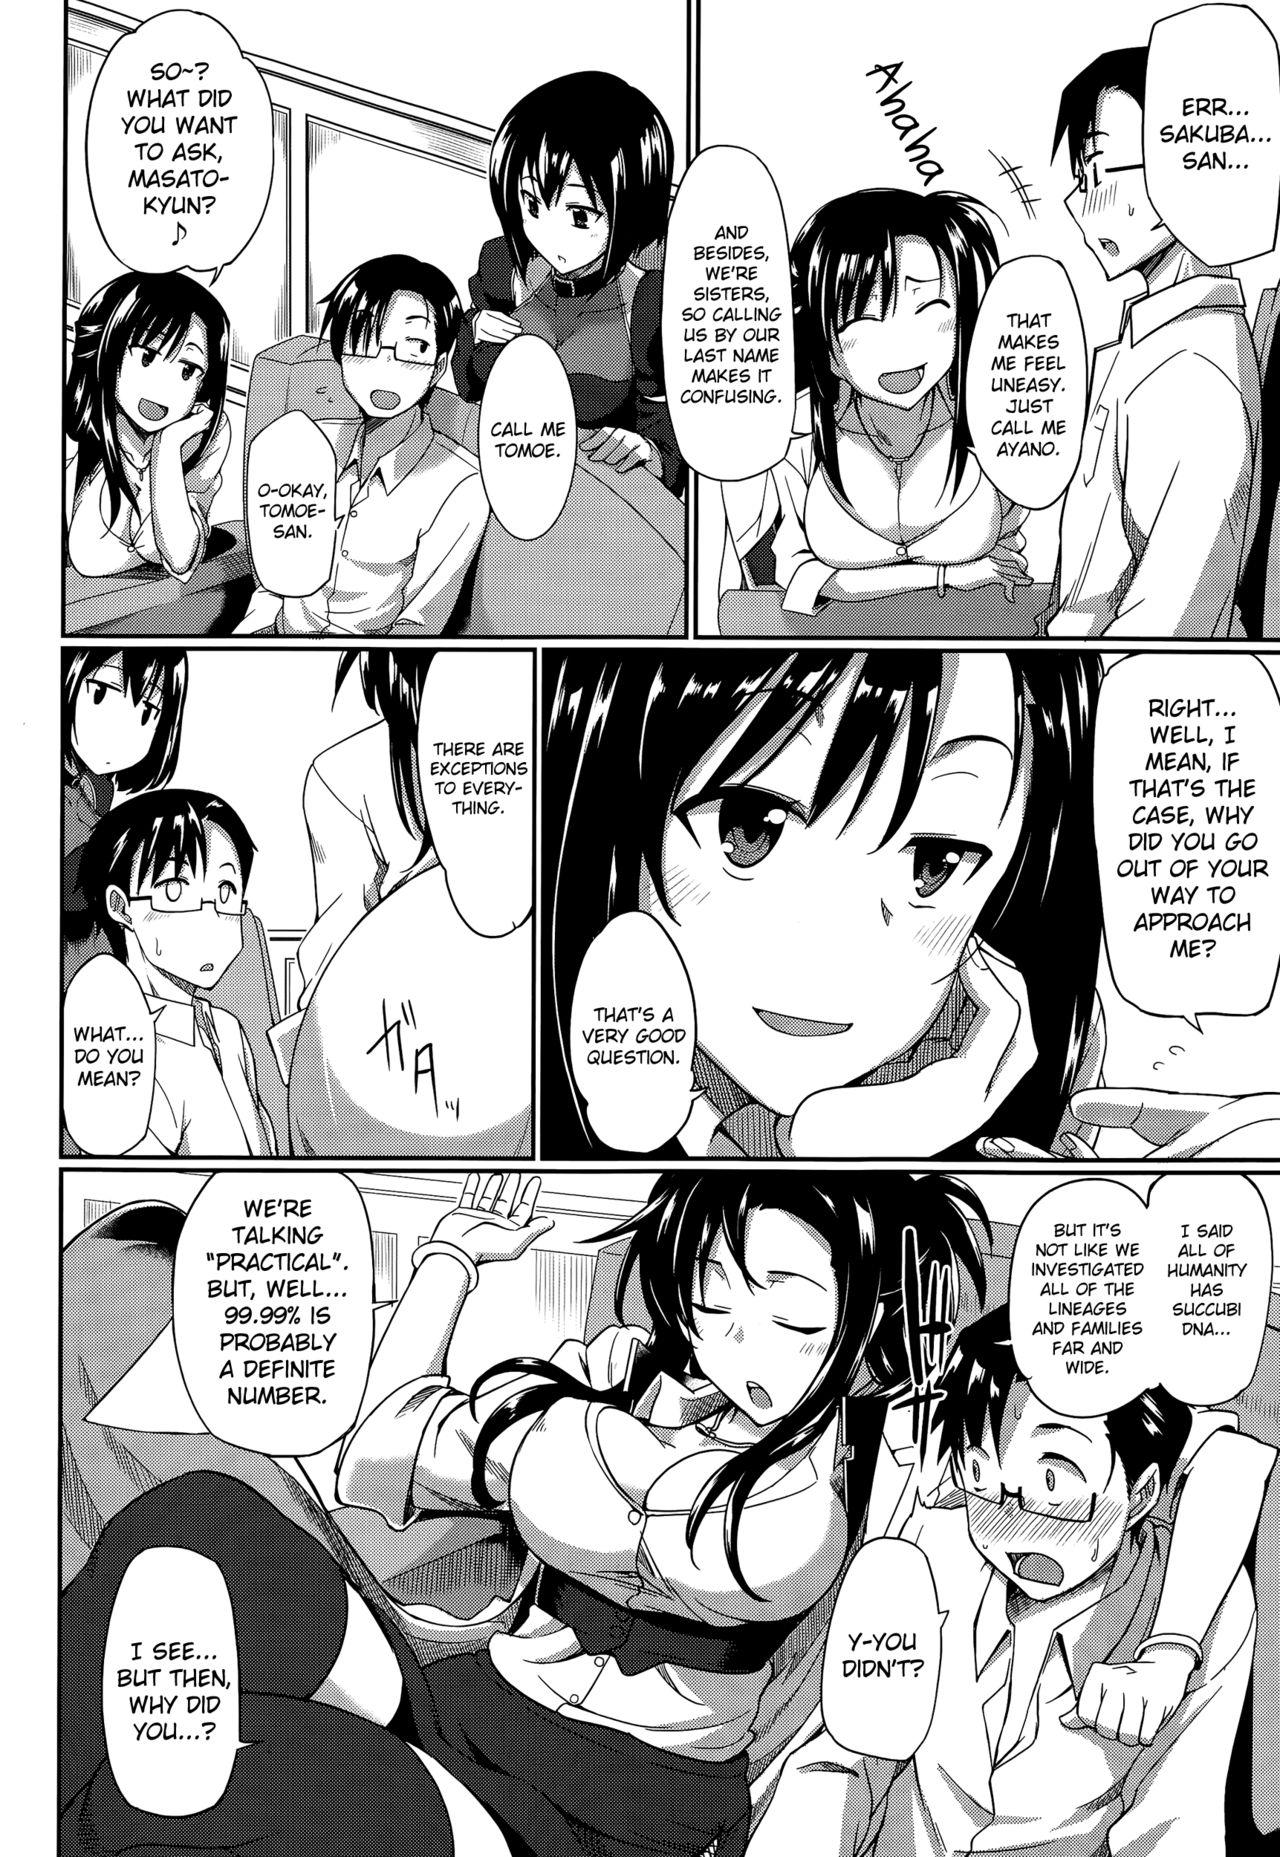 Oil Inma no Mikata! | Succubi's Supporter! Ch. 1-4 Hooker - Page 6